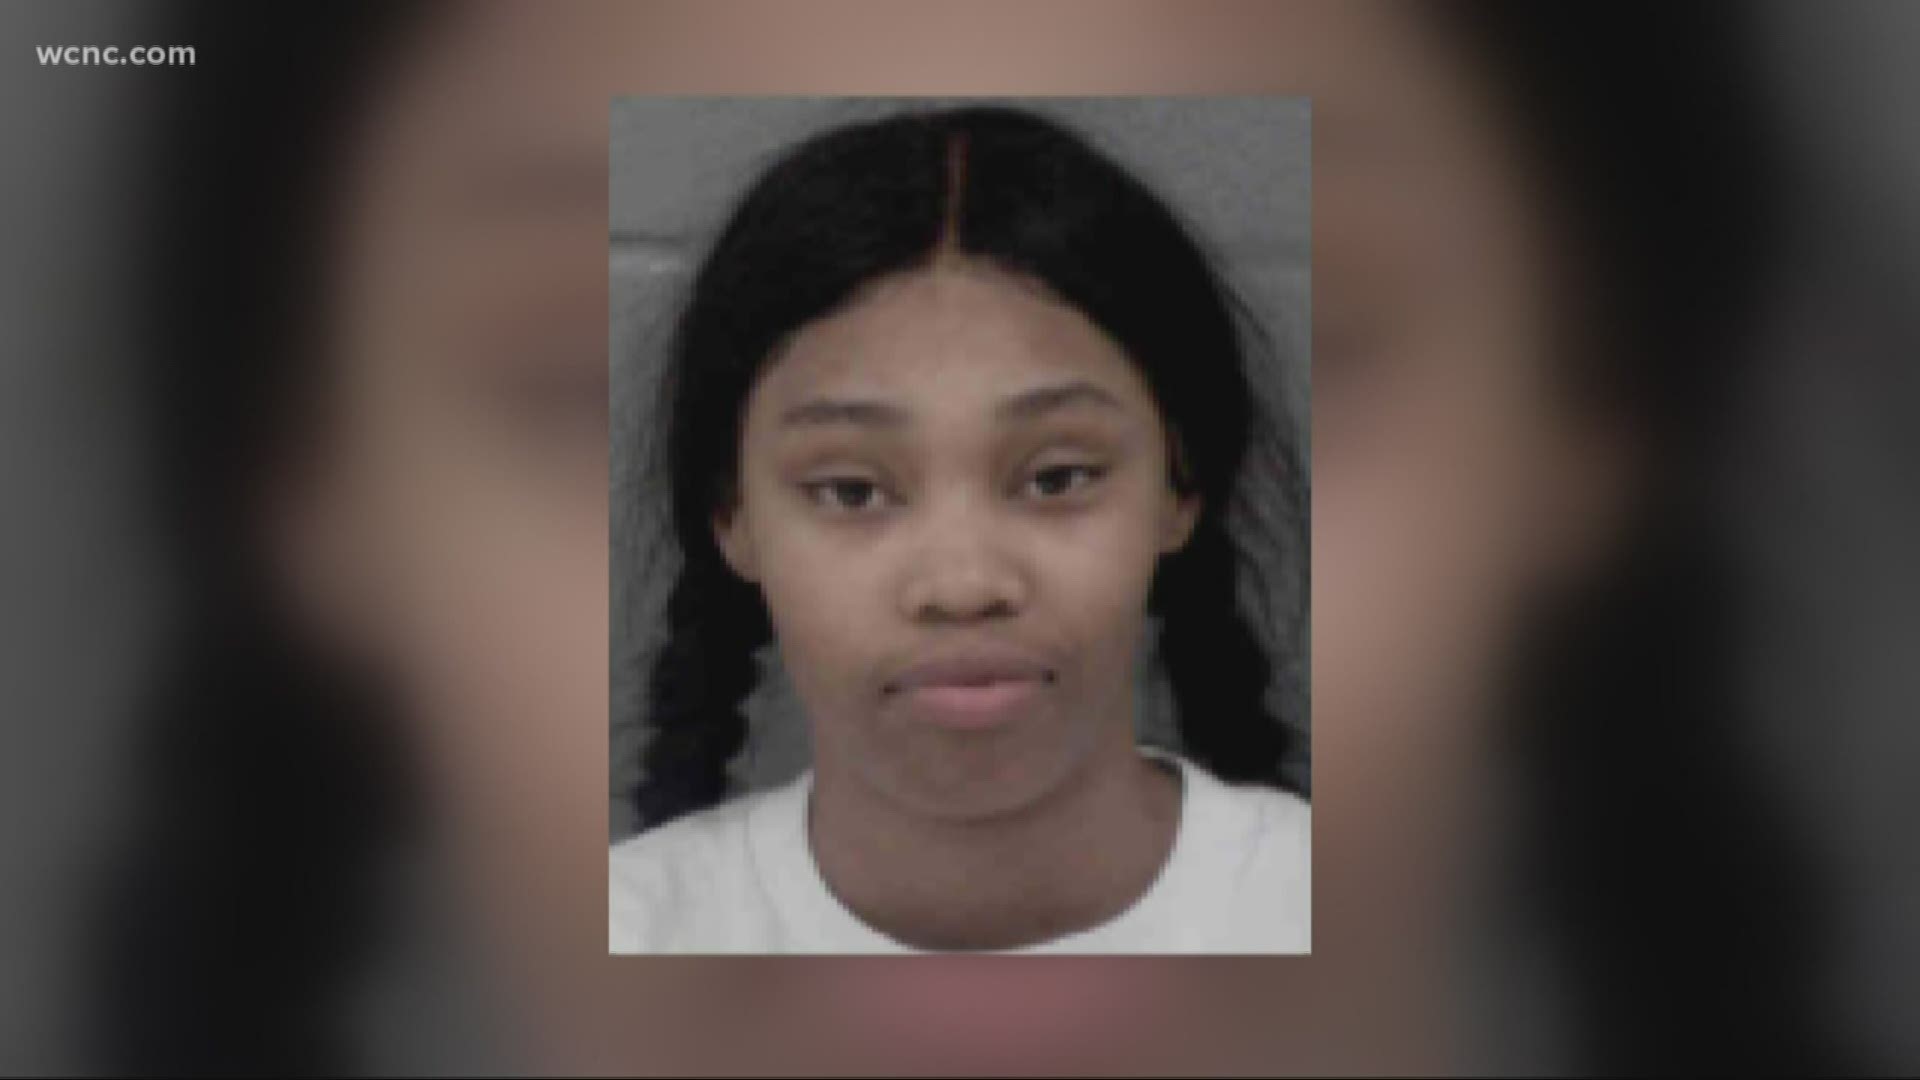 One of them used pepper spray on the loss prevention officers who tried to stop them. The two teenage female suspects have been charged with several crimes.